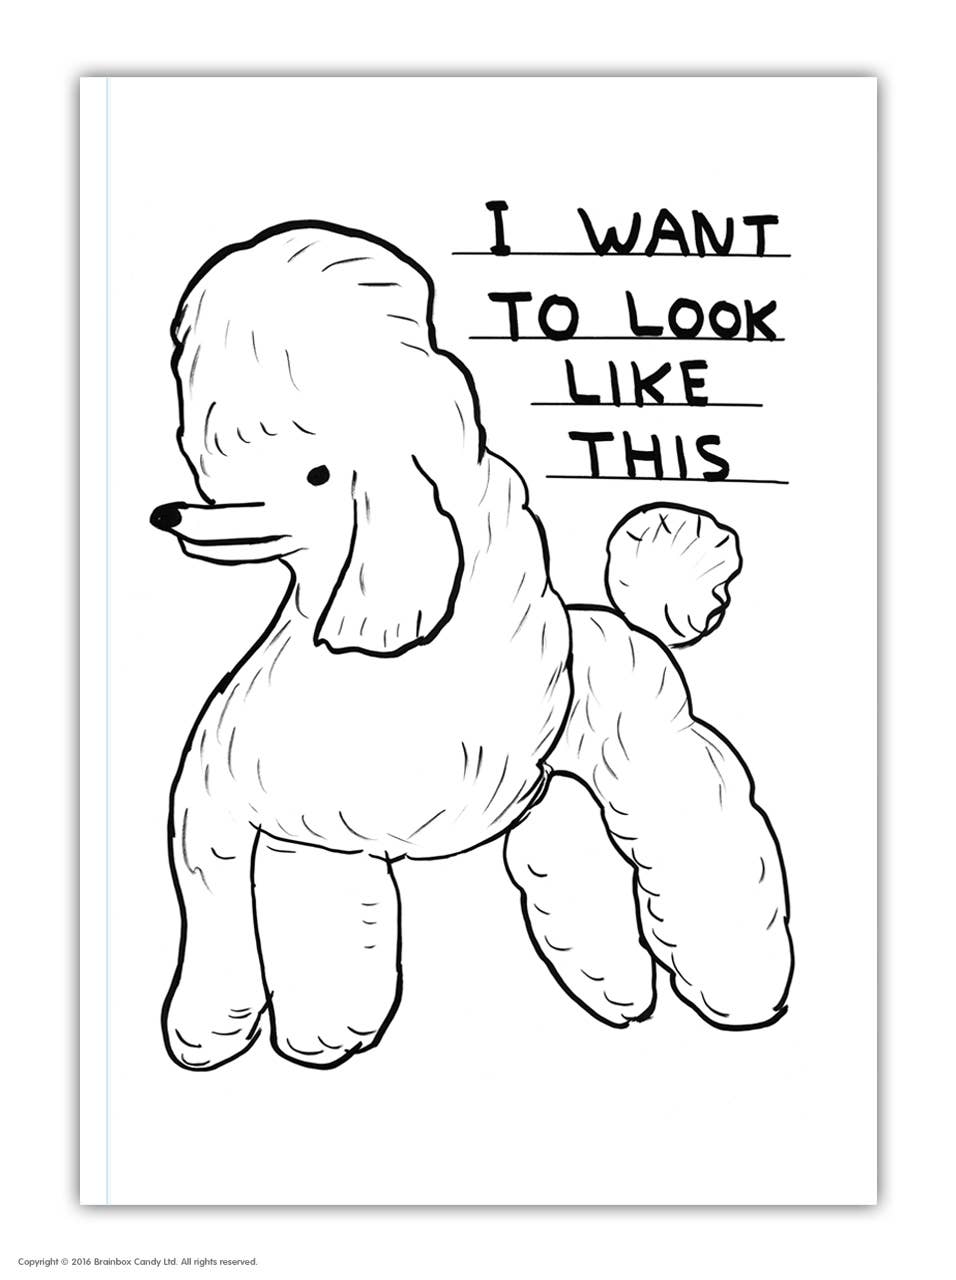 David Shrigley A6 Notebook  Want To Look Like This